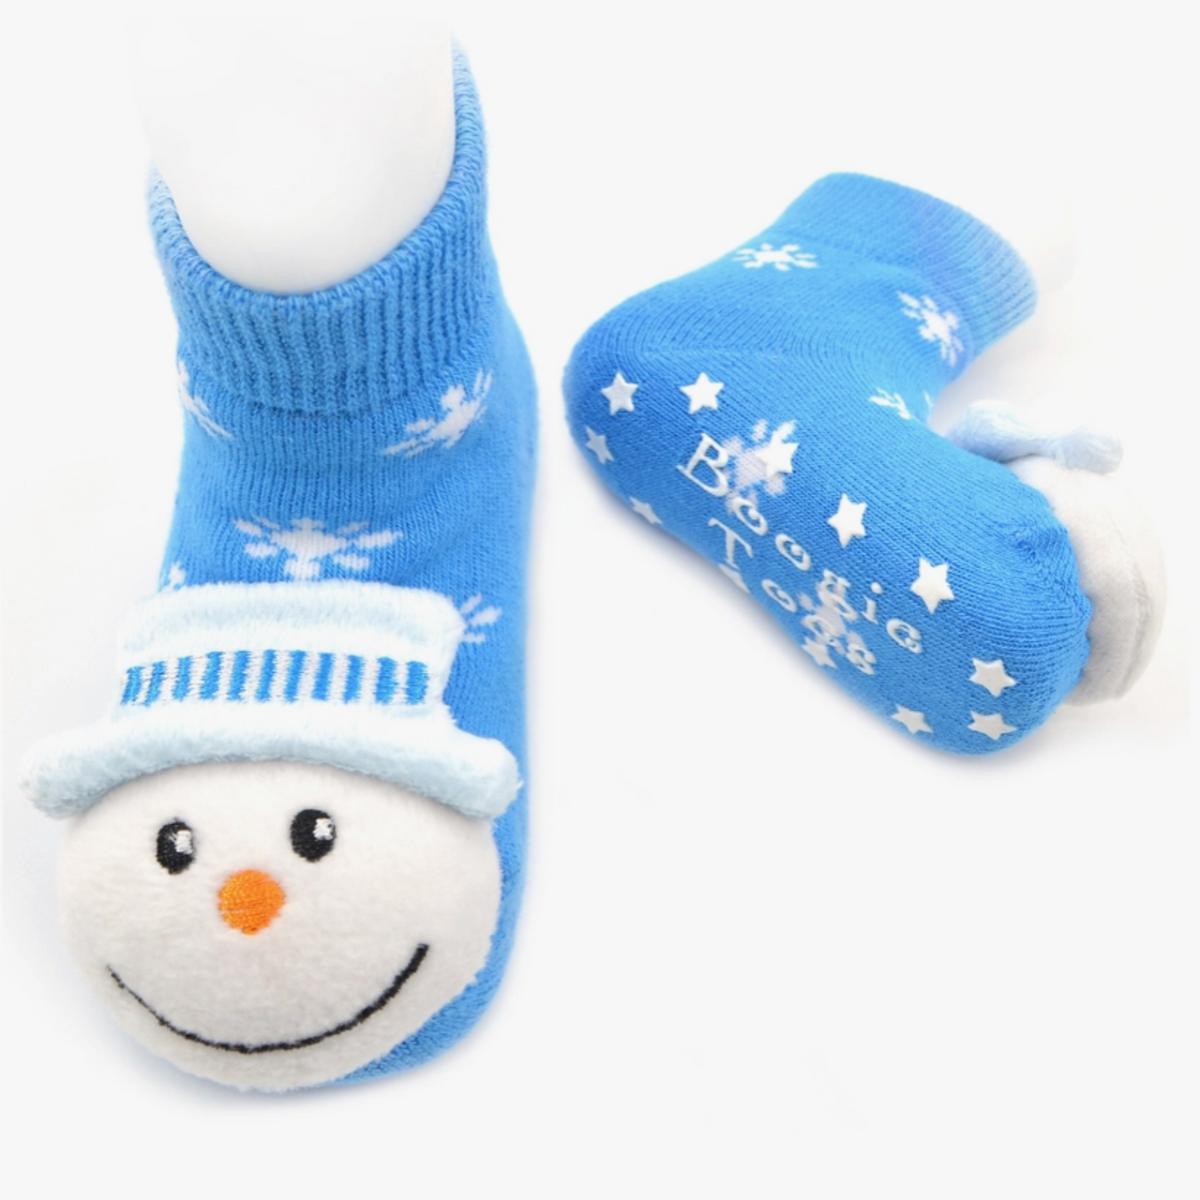 Piero Liventi Boogie Toes rattle baby sock